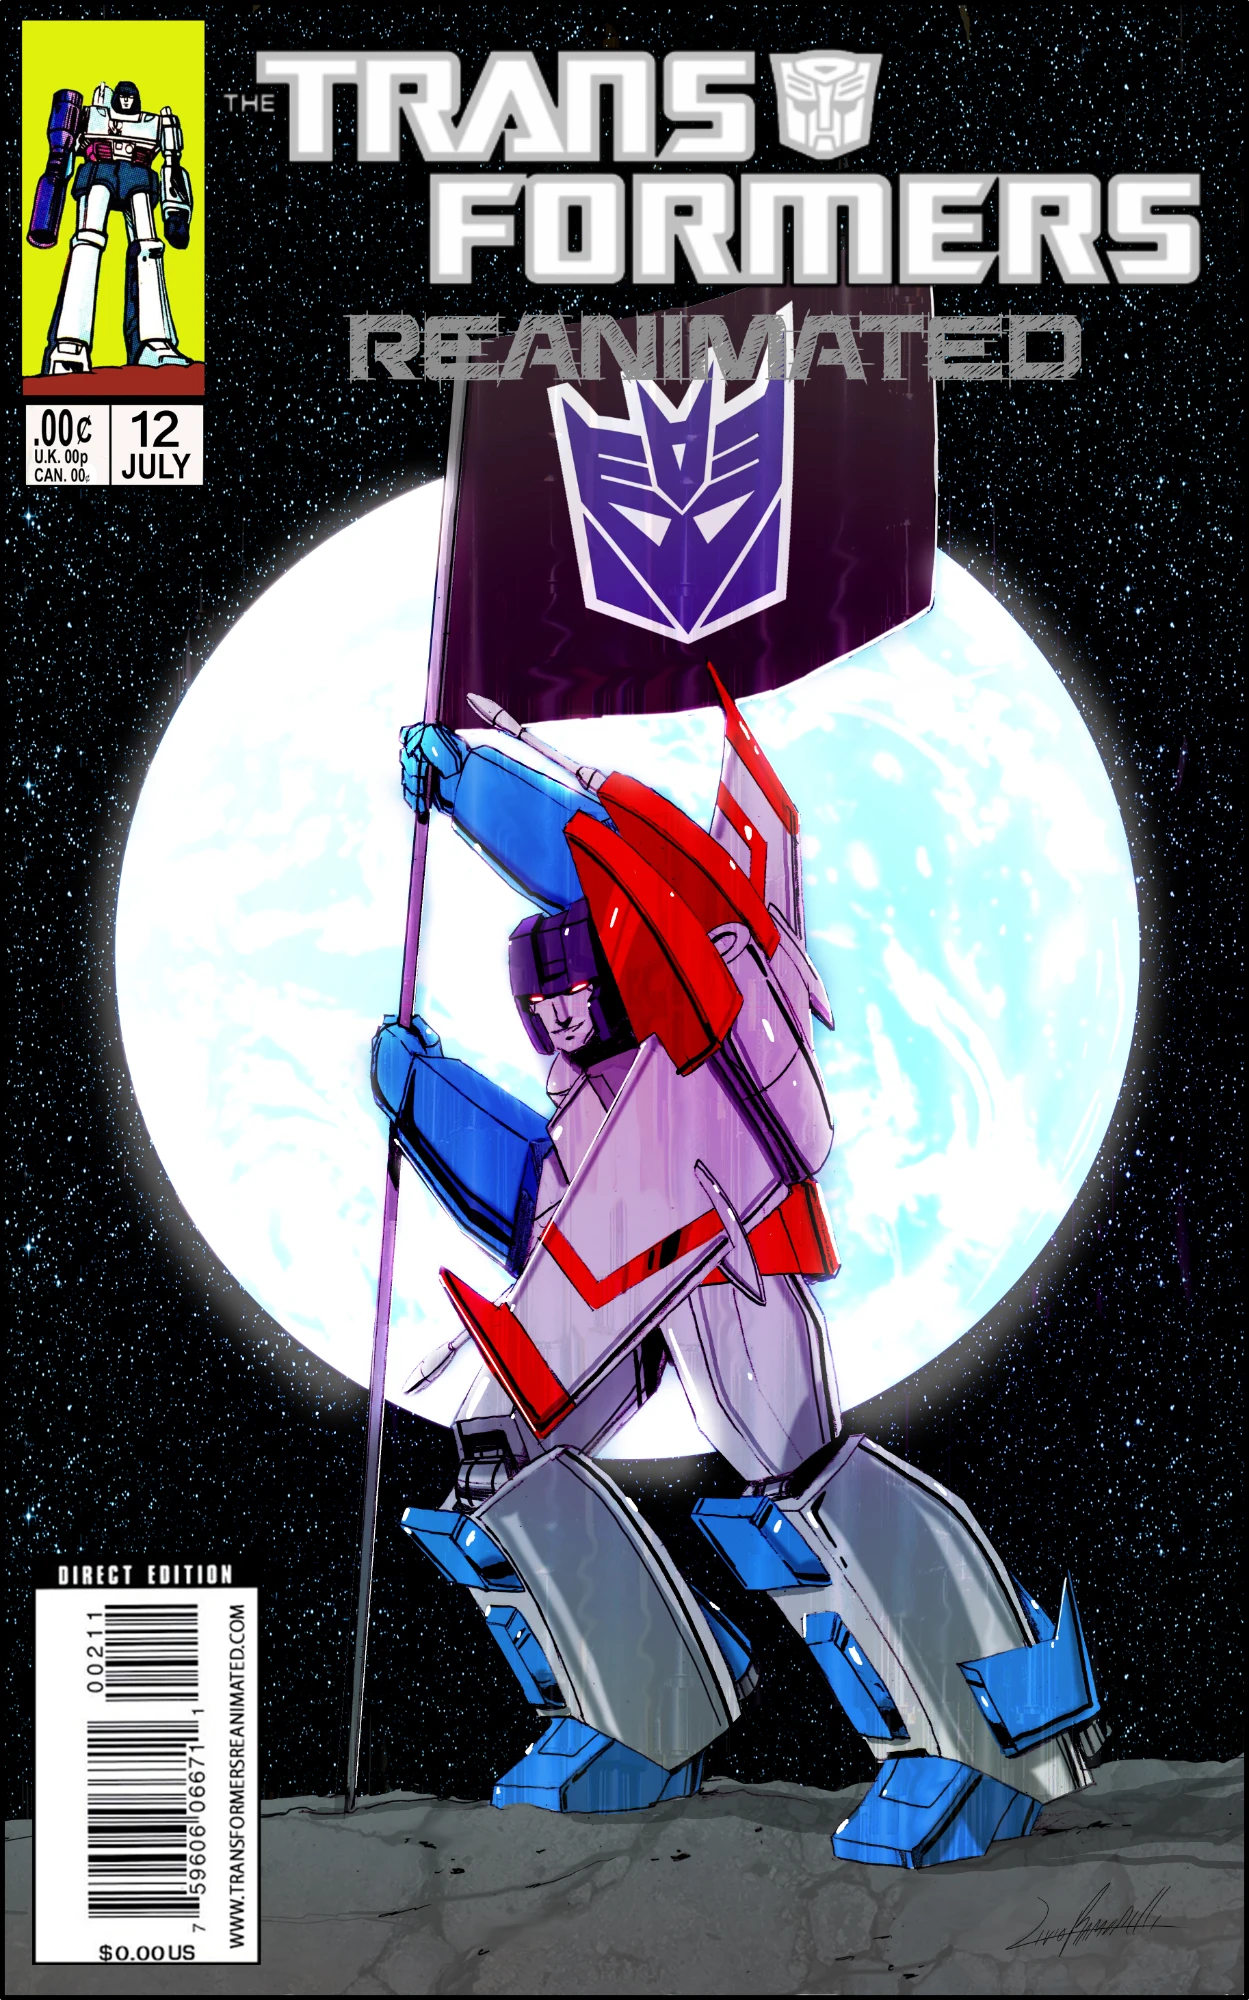 Transformers comic cover showing Starscream planting a Decepticon flag on the moon